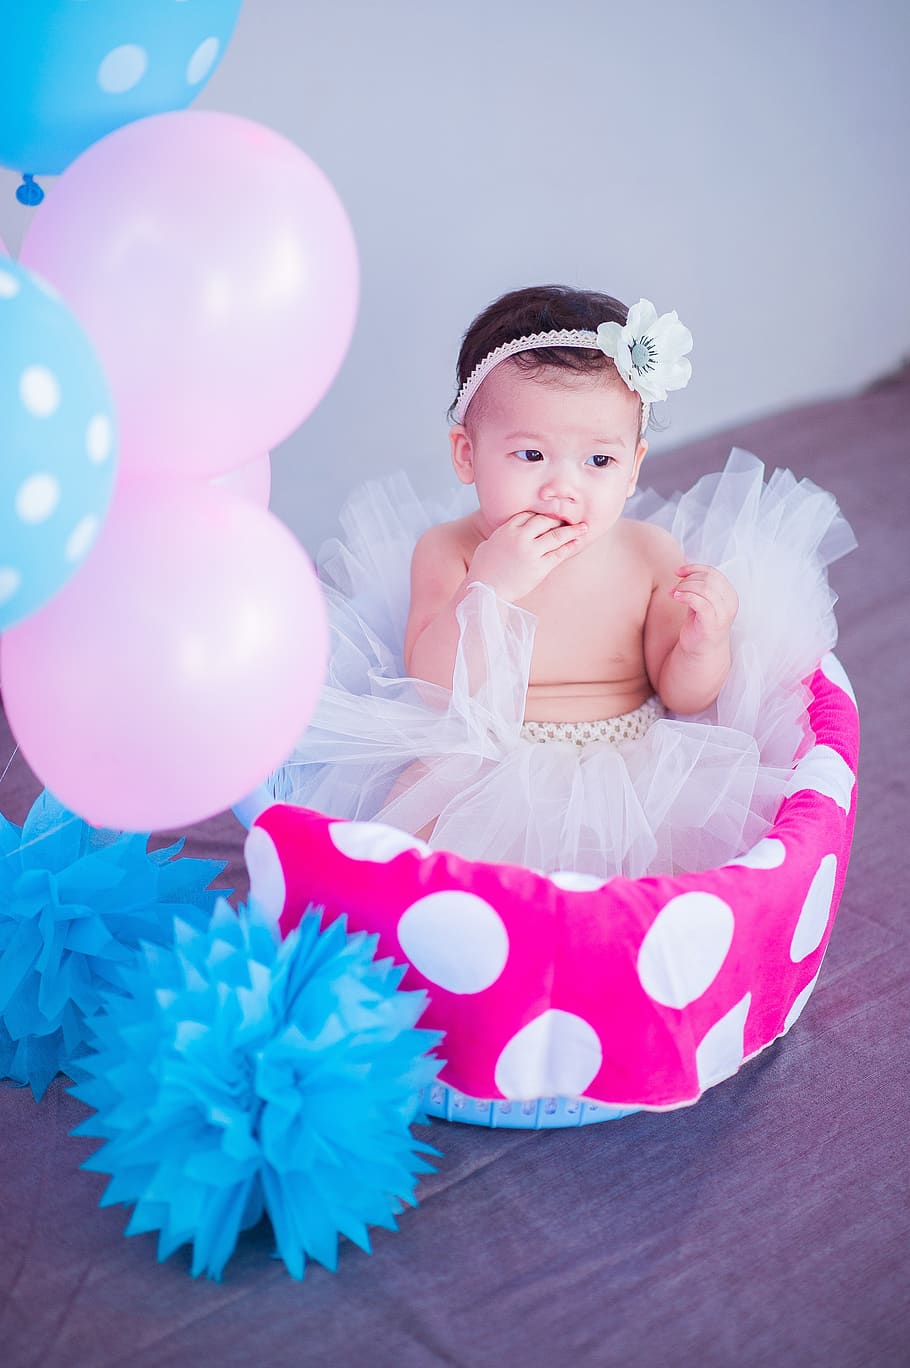 Baby Sitting on White and Pink Polka-dot Basket With Balloons